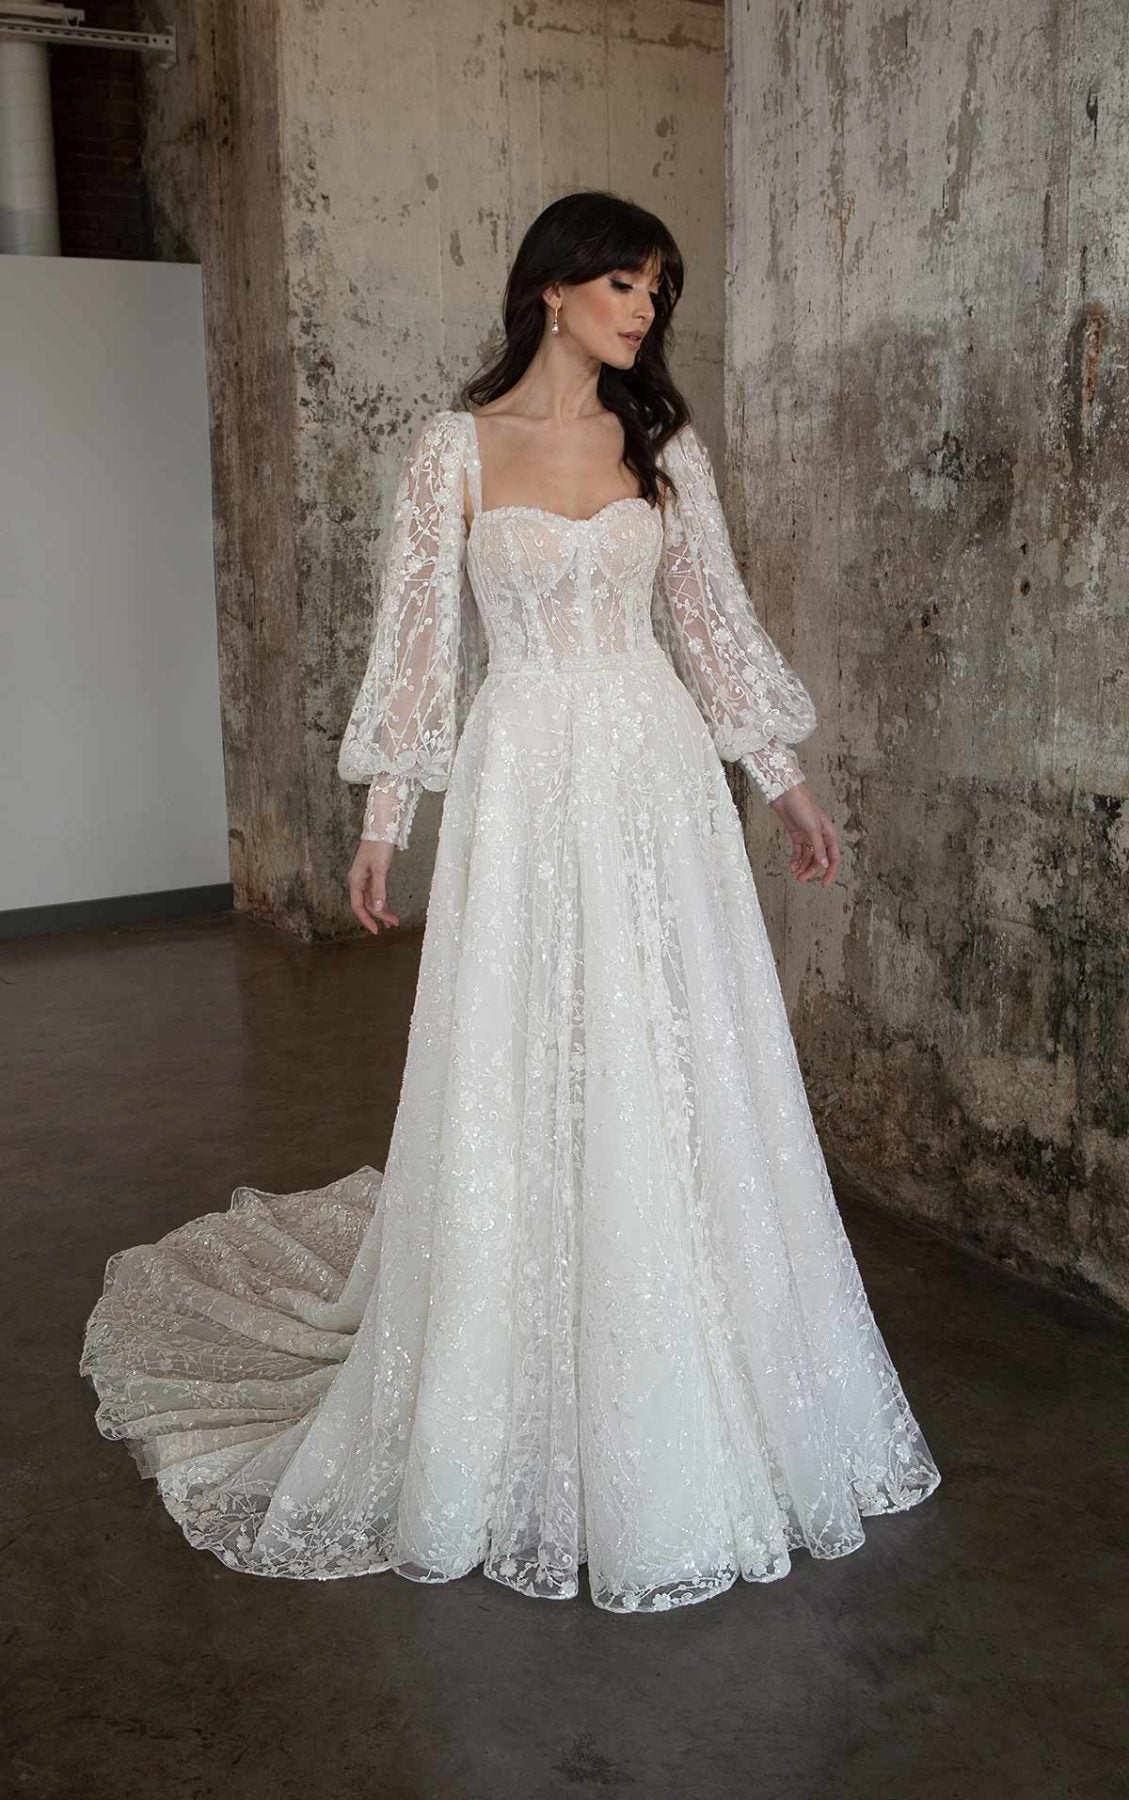 Lace A-line Wedding Dress With Detachable Long Sleeves | Kleinfeld Bridal